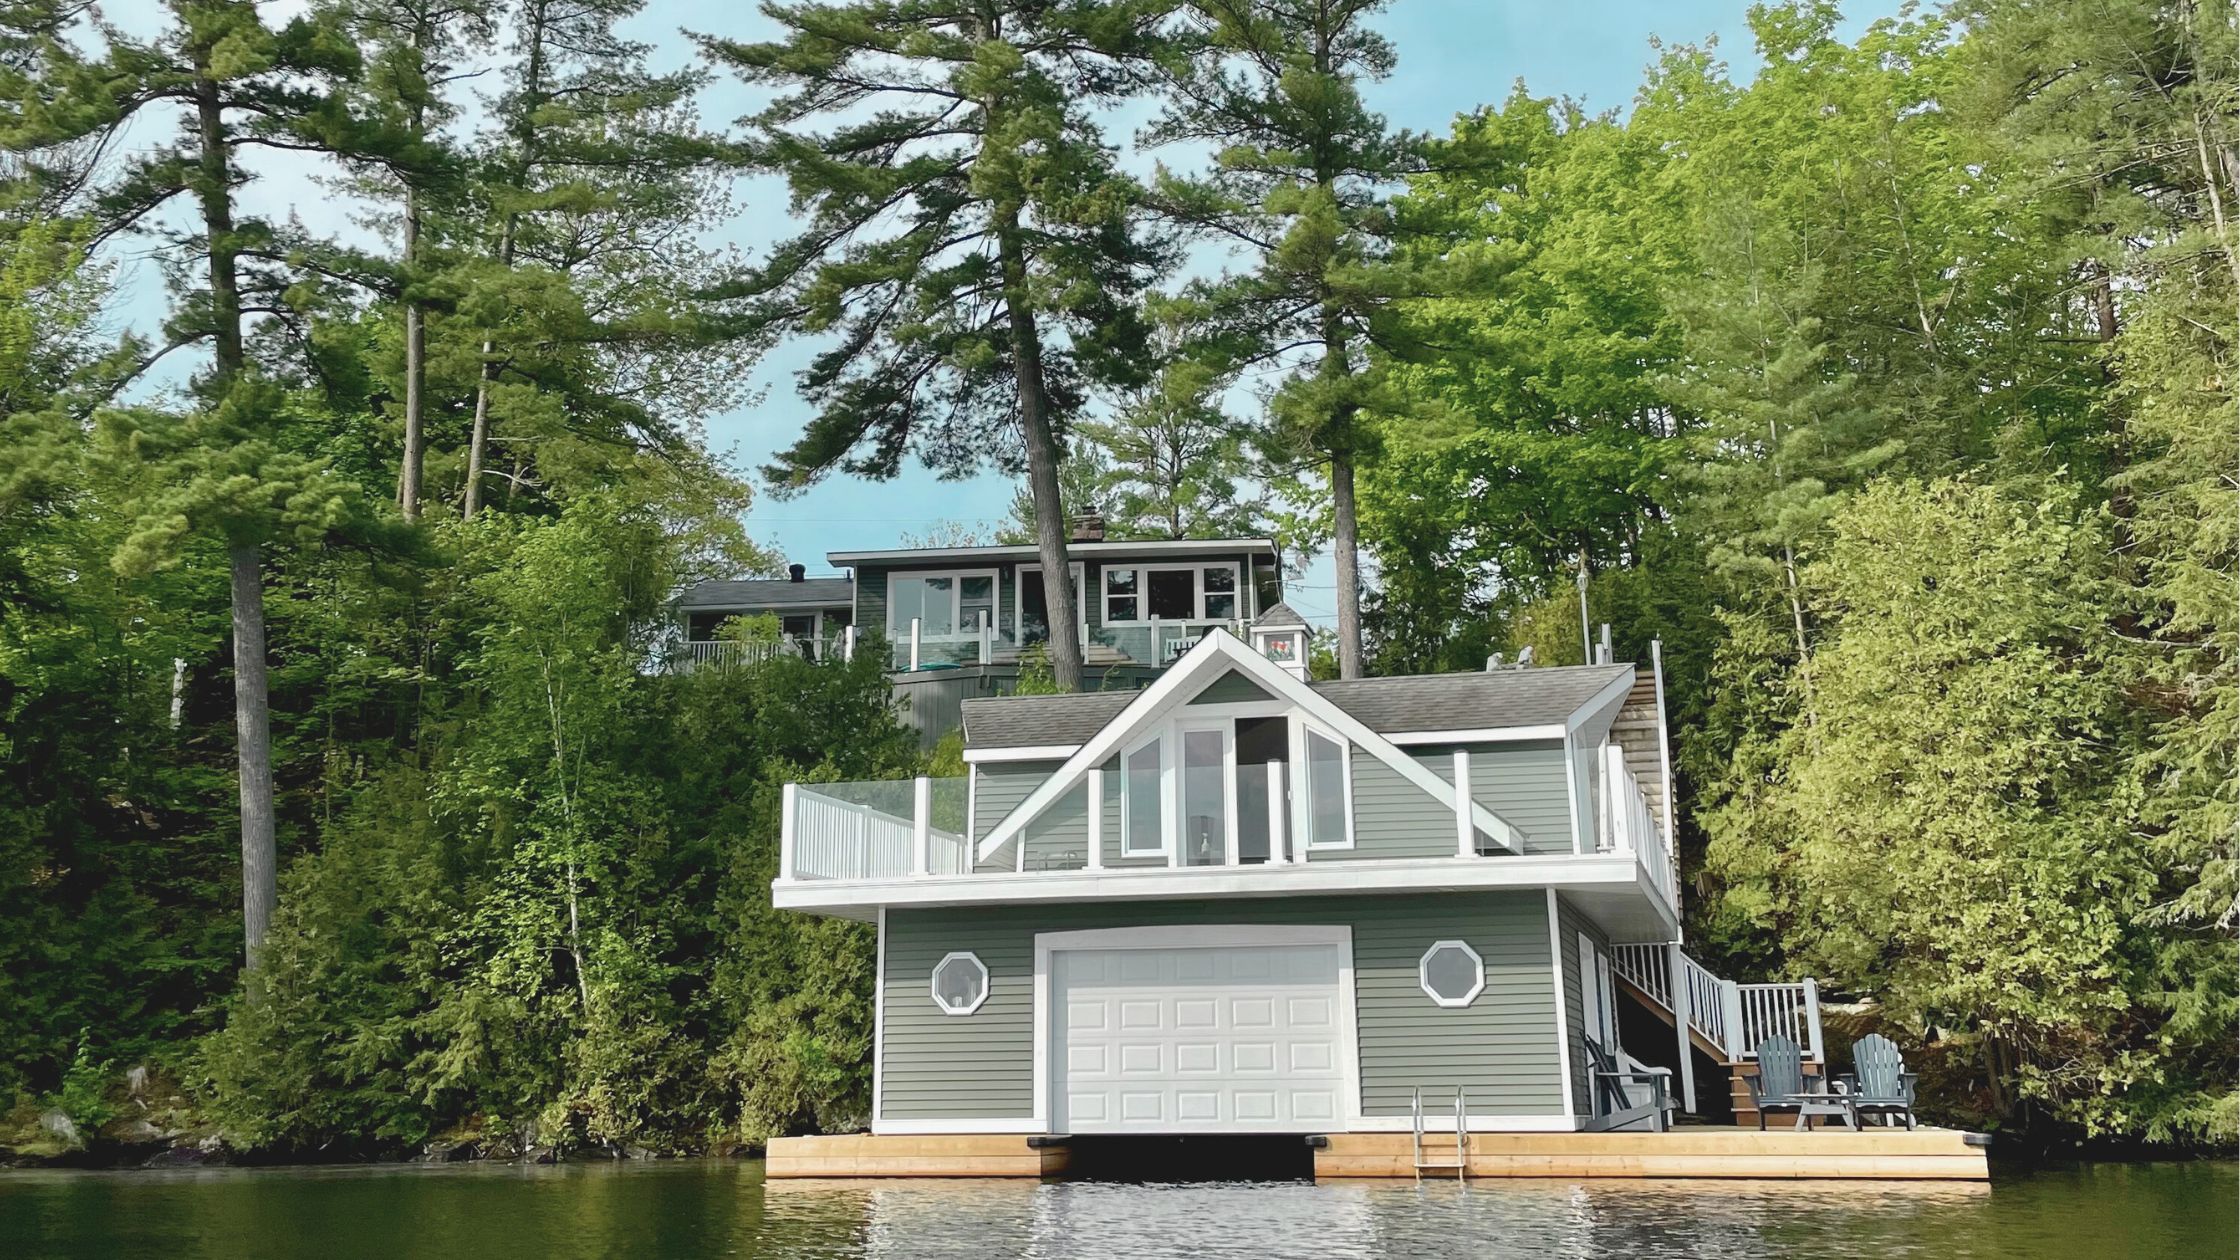 Lake House Rentals with a Boat House